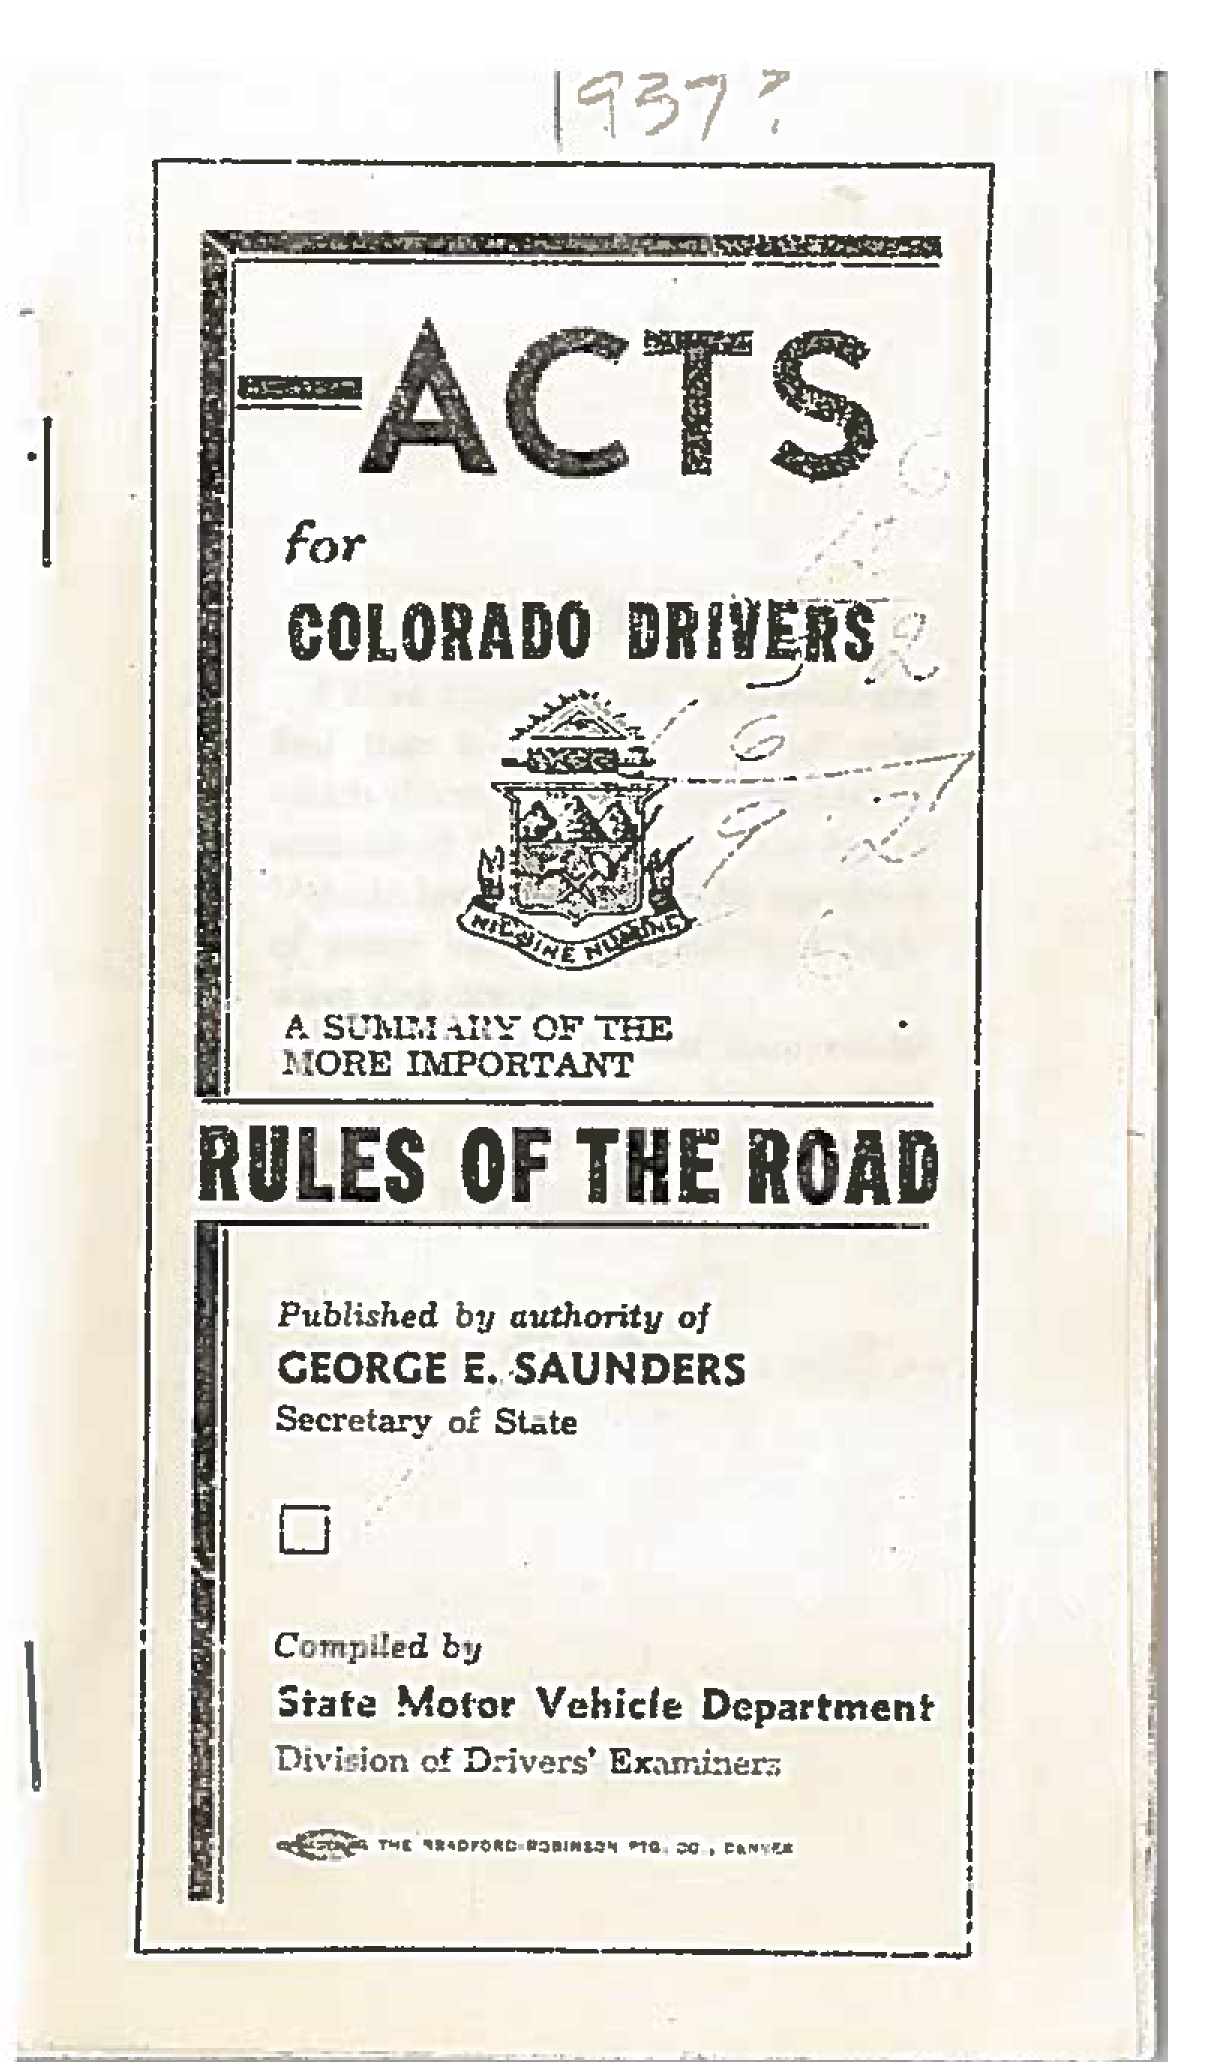 "Facts for Colorado Drivers: A Summary of the More Important Rules of the Road, published by authority of George E. Saunders, Secretary of State, Compiled by State Motor Vehicle Department." Circa 1957